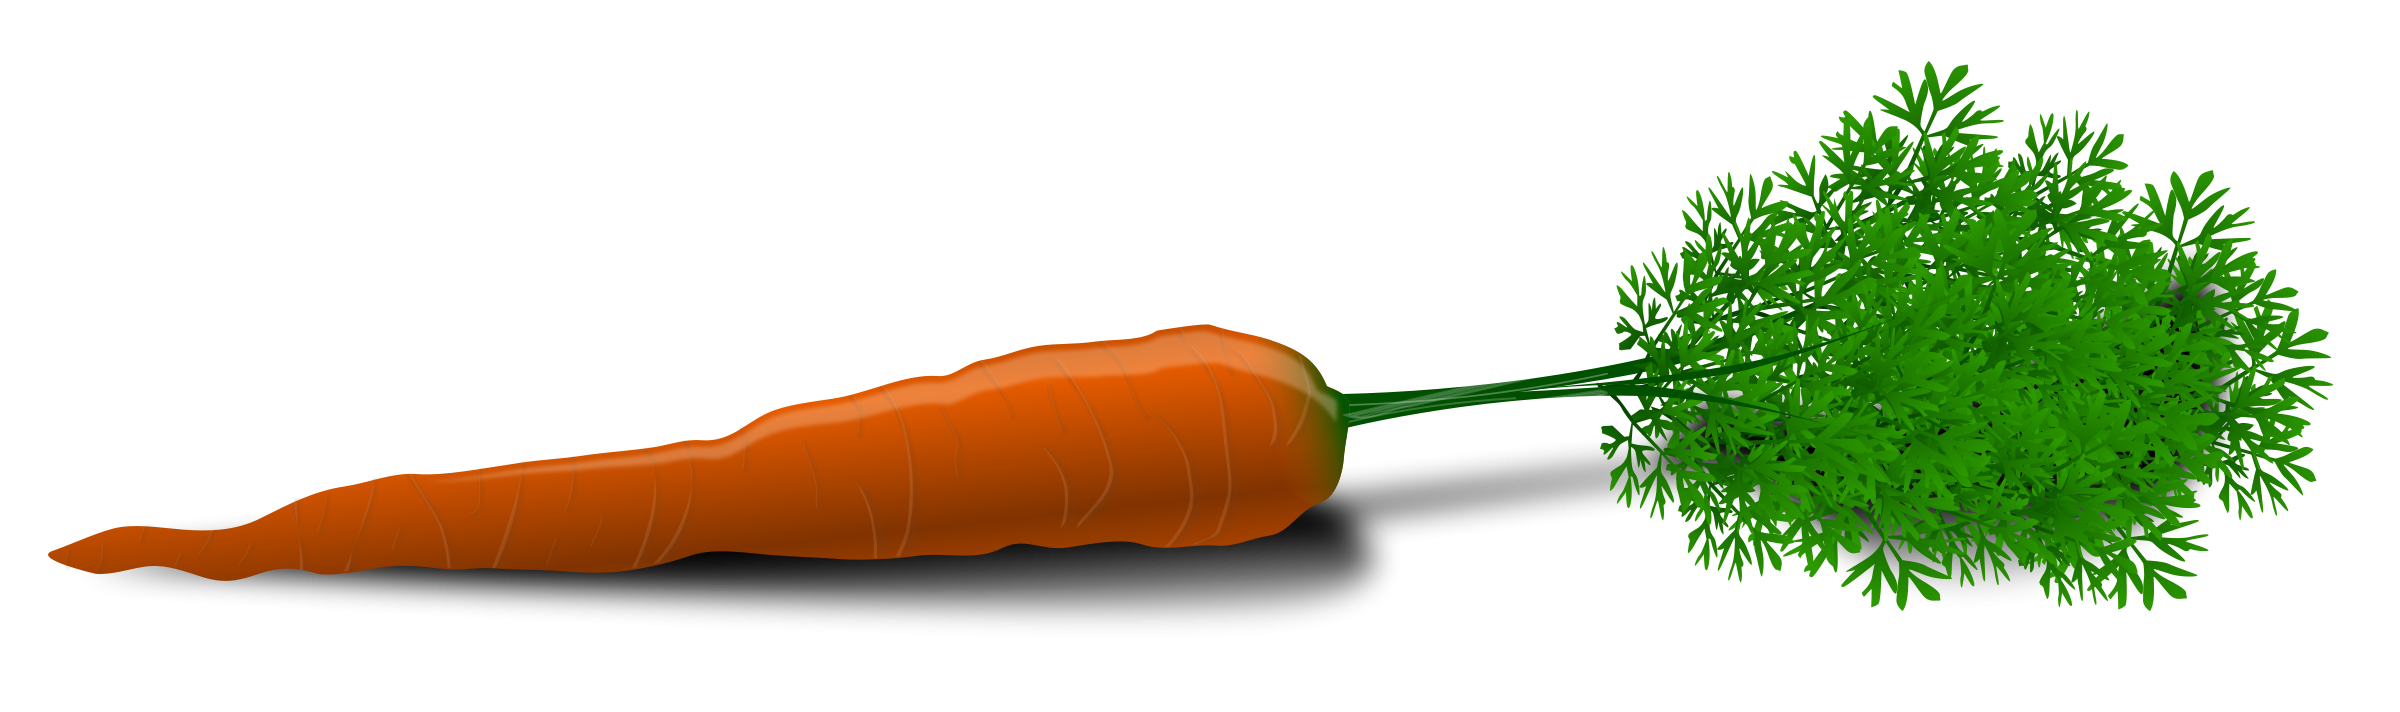 carrot_PNG4986.png